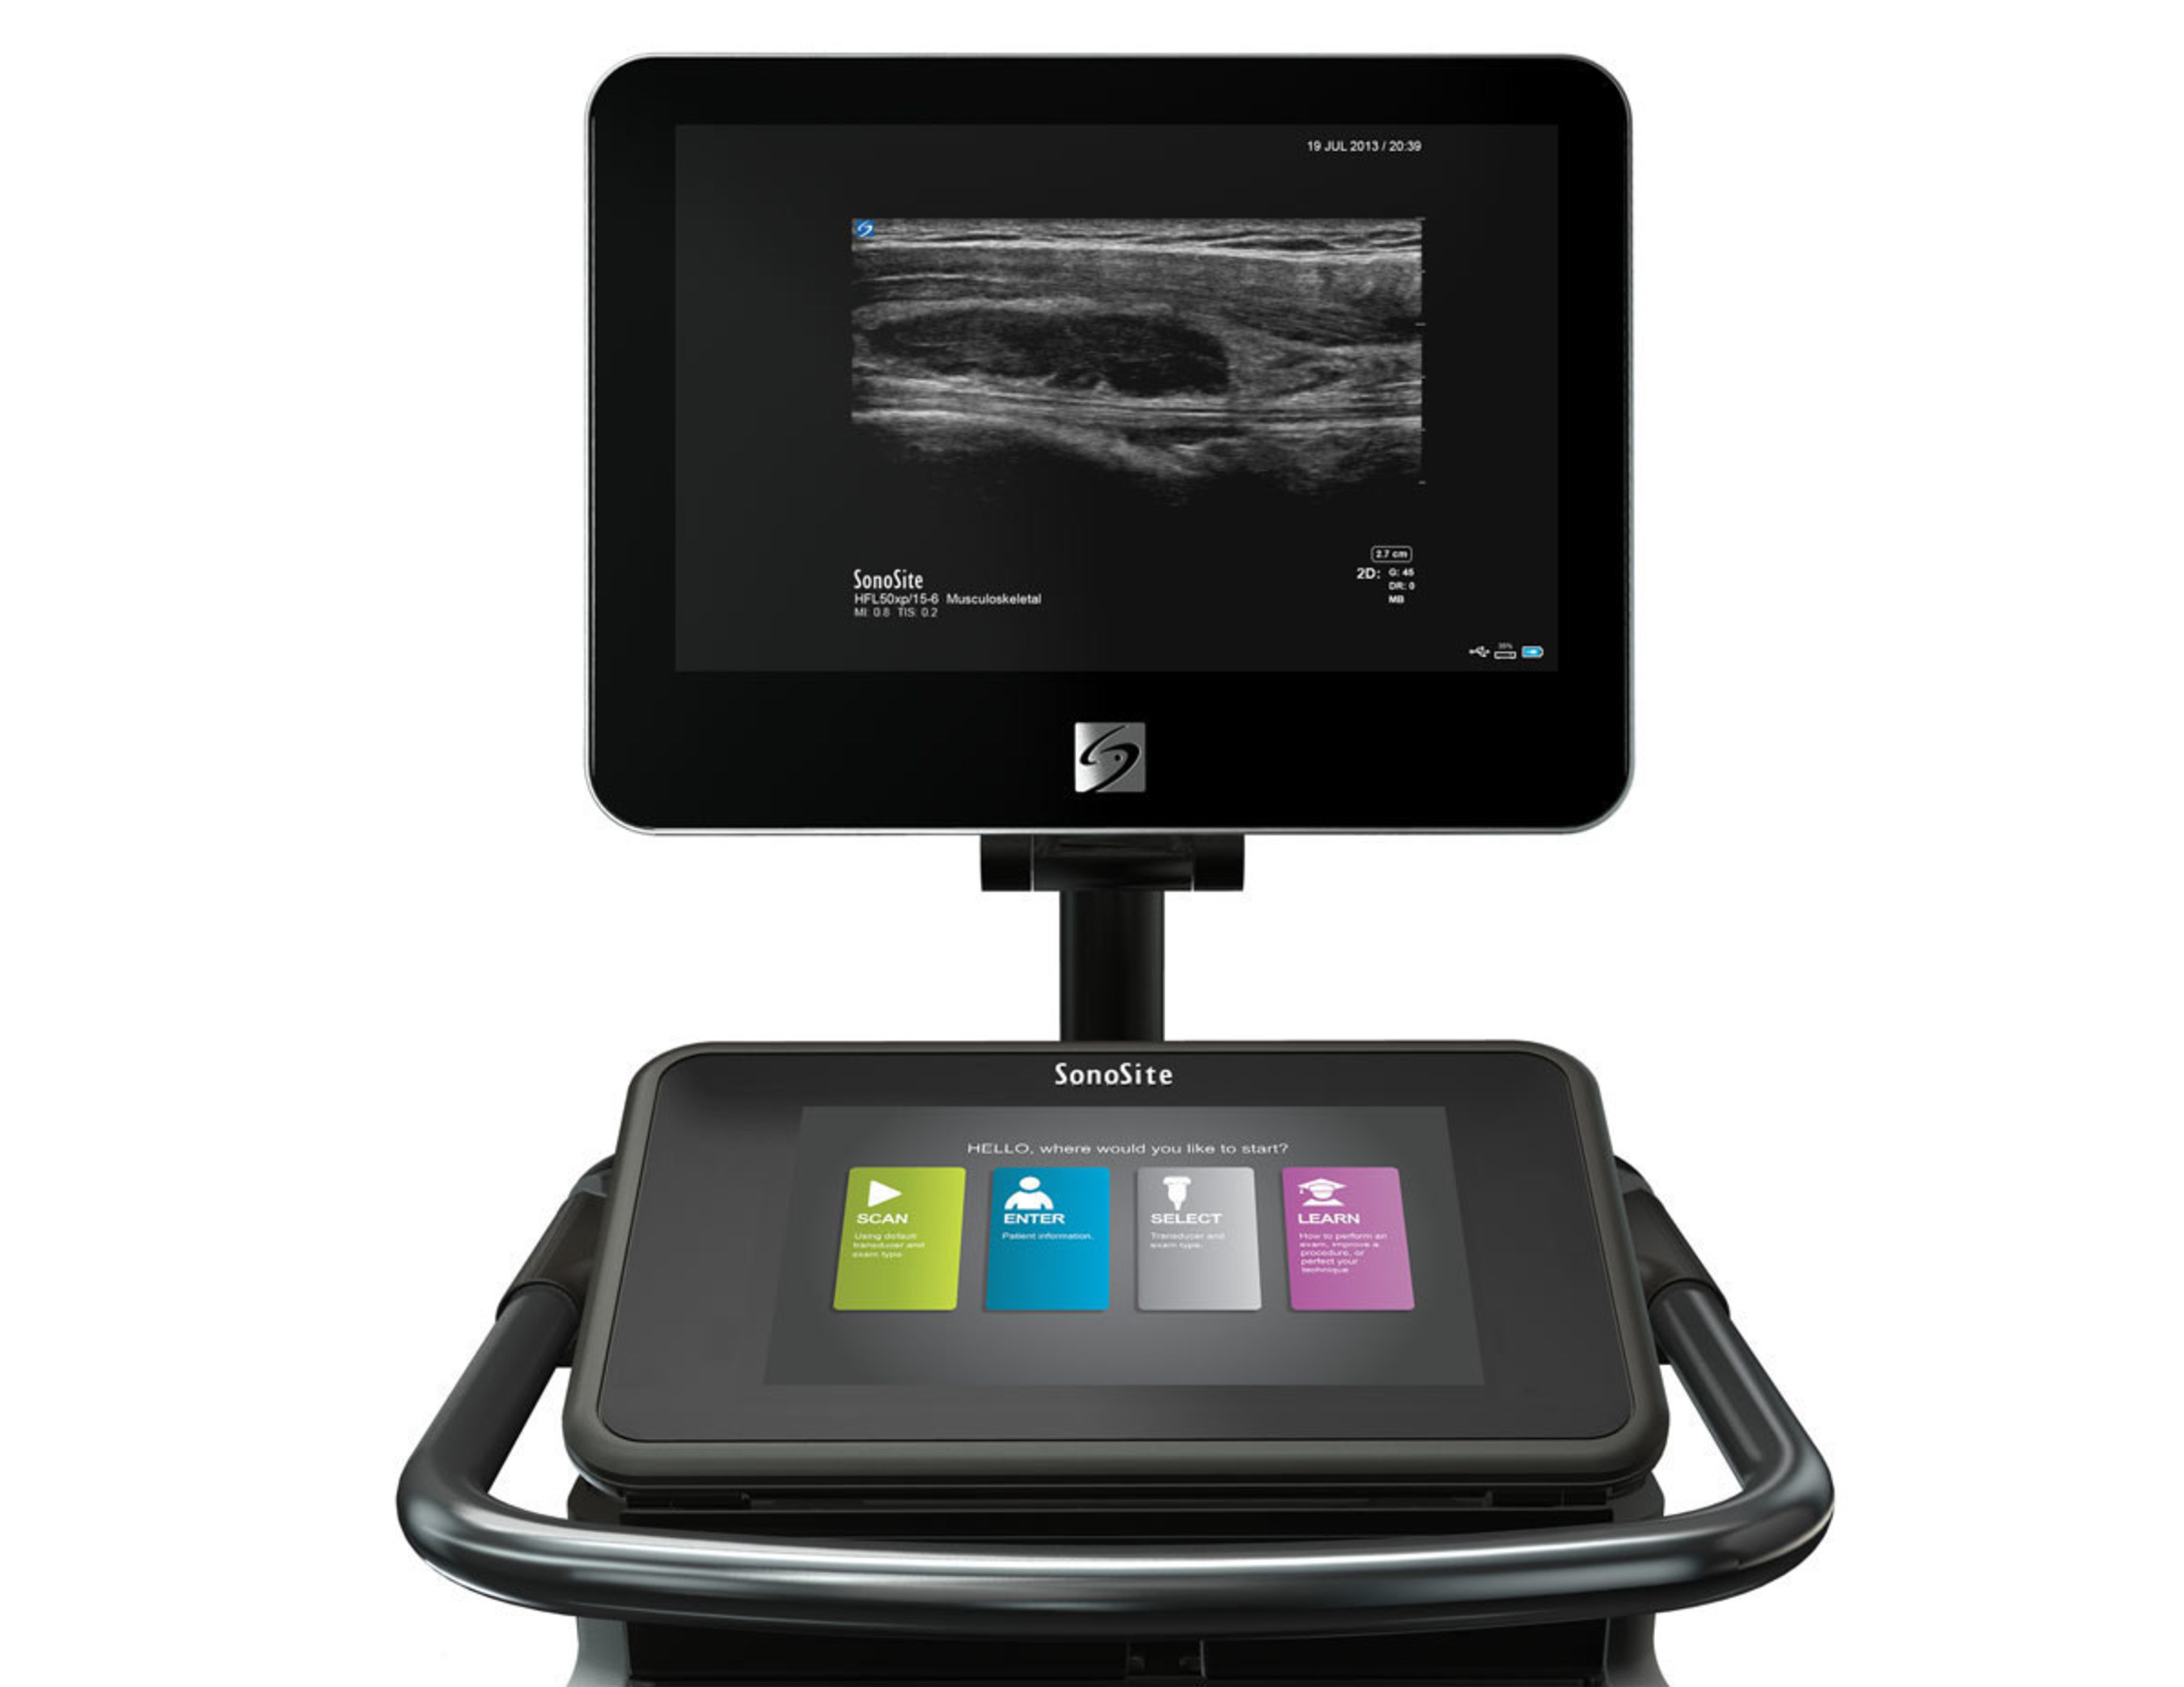 FUJIFILM SHOWCASES WORLD'S FIRST ULTRASOUND KIOSK AND EXPANDS USE OF ULTRASOUND INTO VARIETY OF CLINICAL SETTINGS AT RSNA